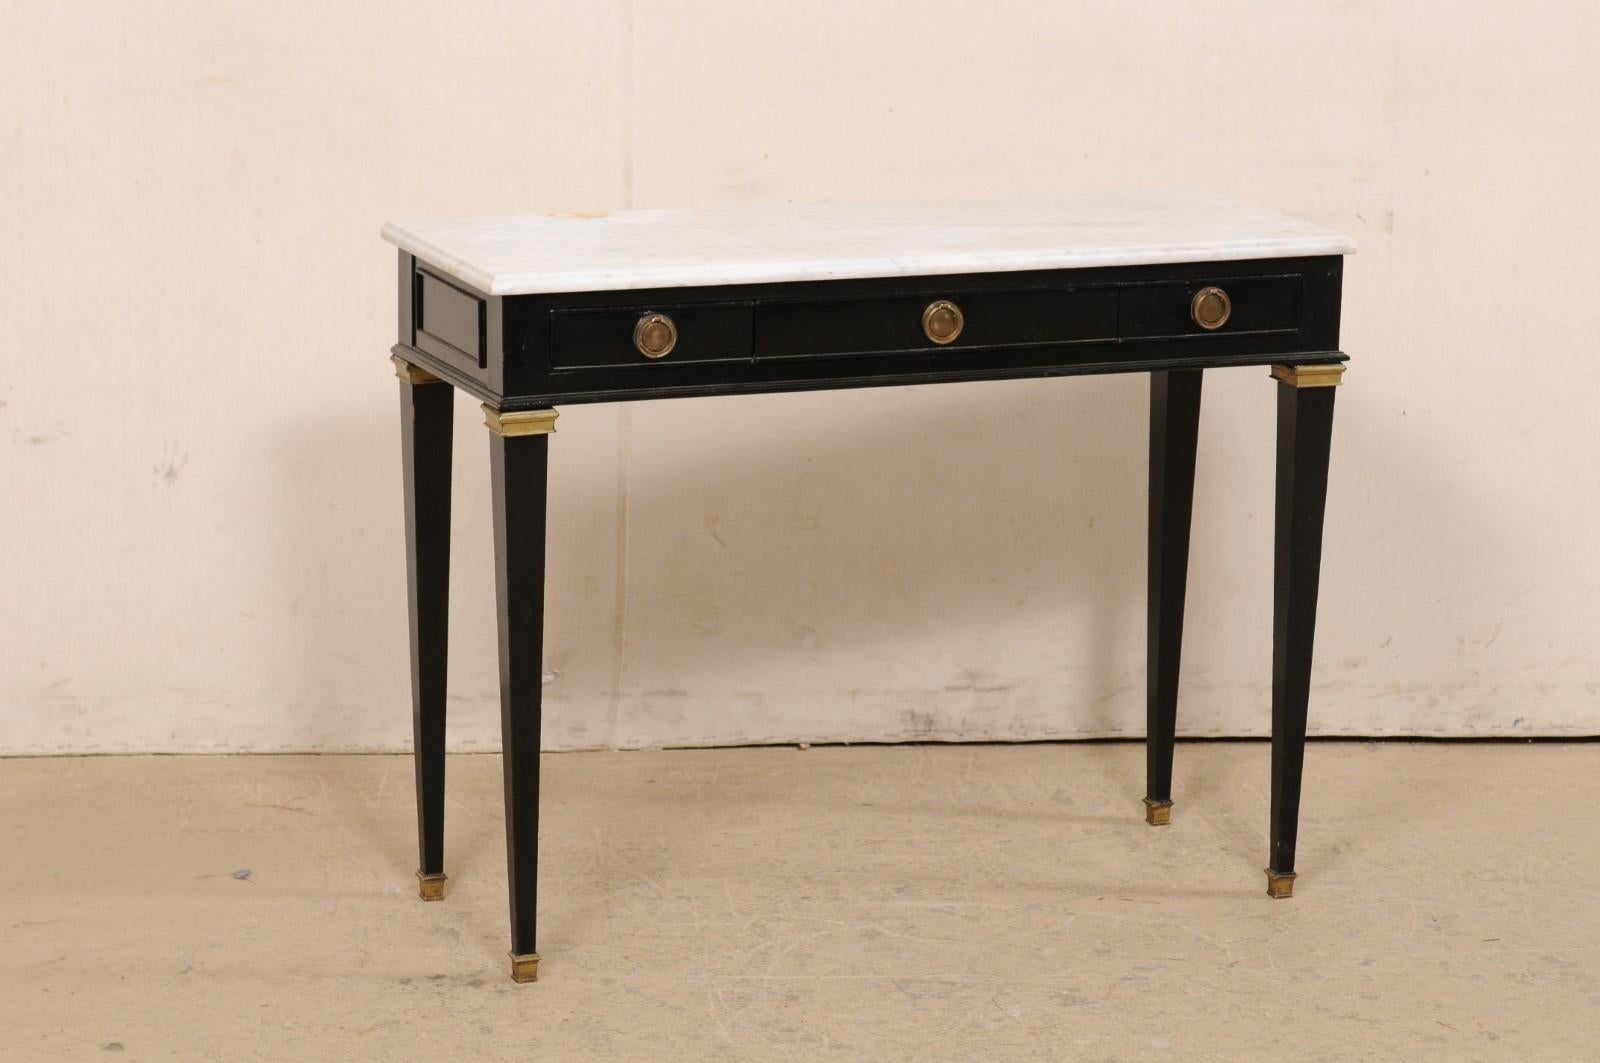 A French painted console table with drawers and its original marble top. This vintage table from France features a 39